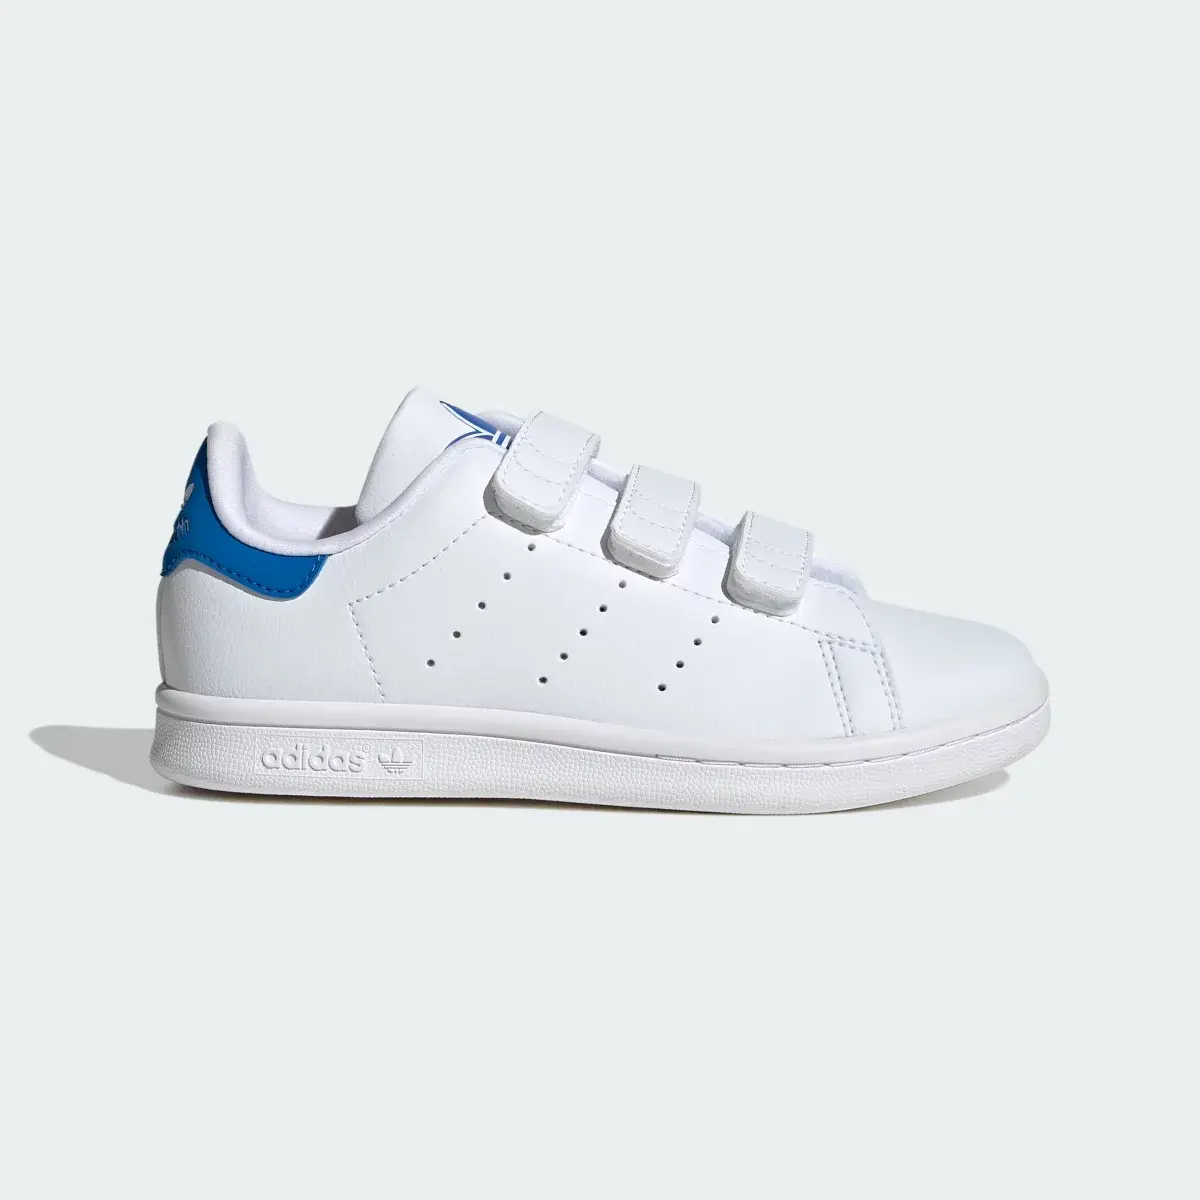 Adidas Stan Smith Comfort Closure Shoes Kids. 2